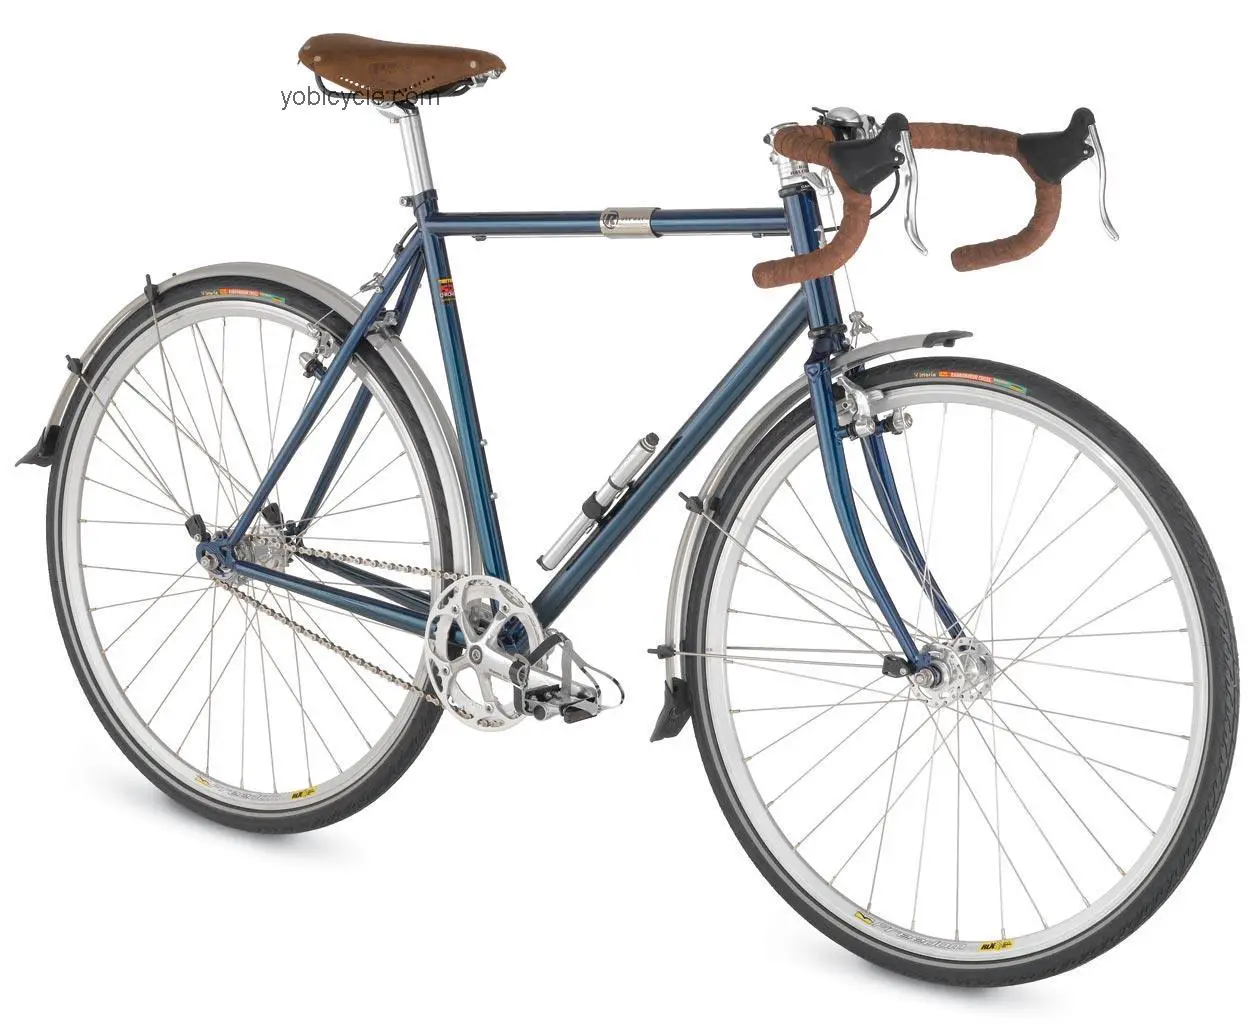 Raleigh One Way competitors and comparison tool online specs and performance